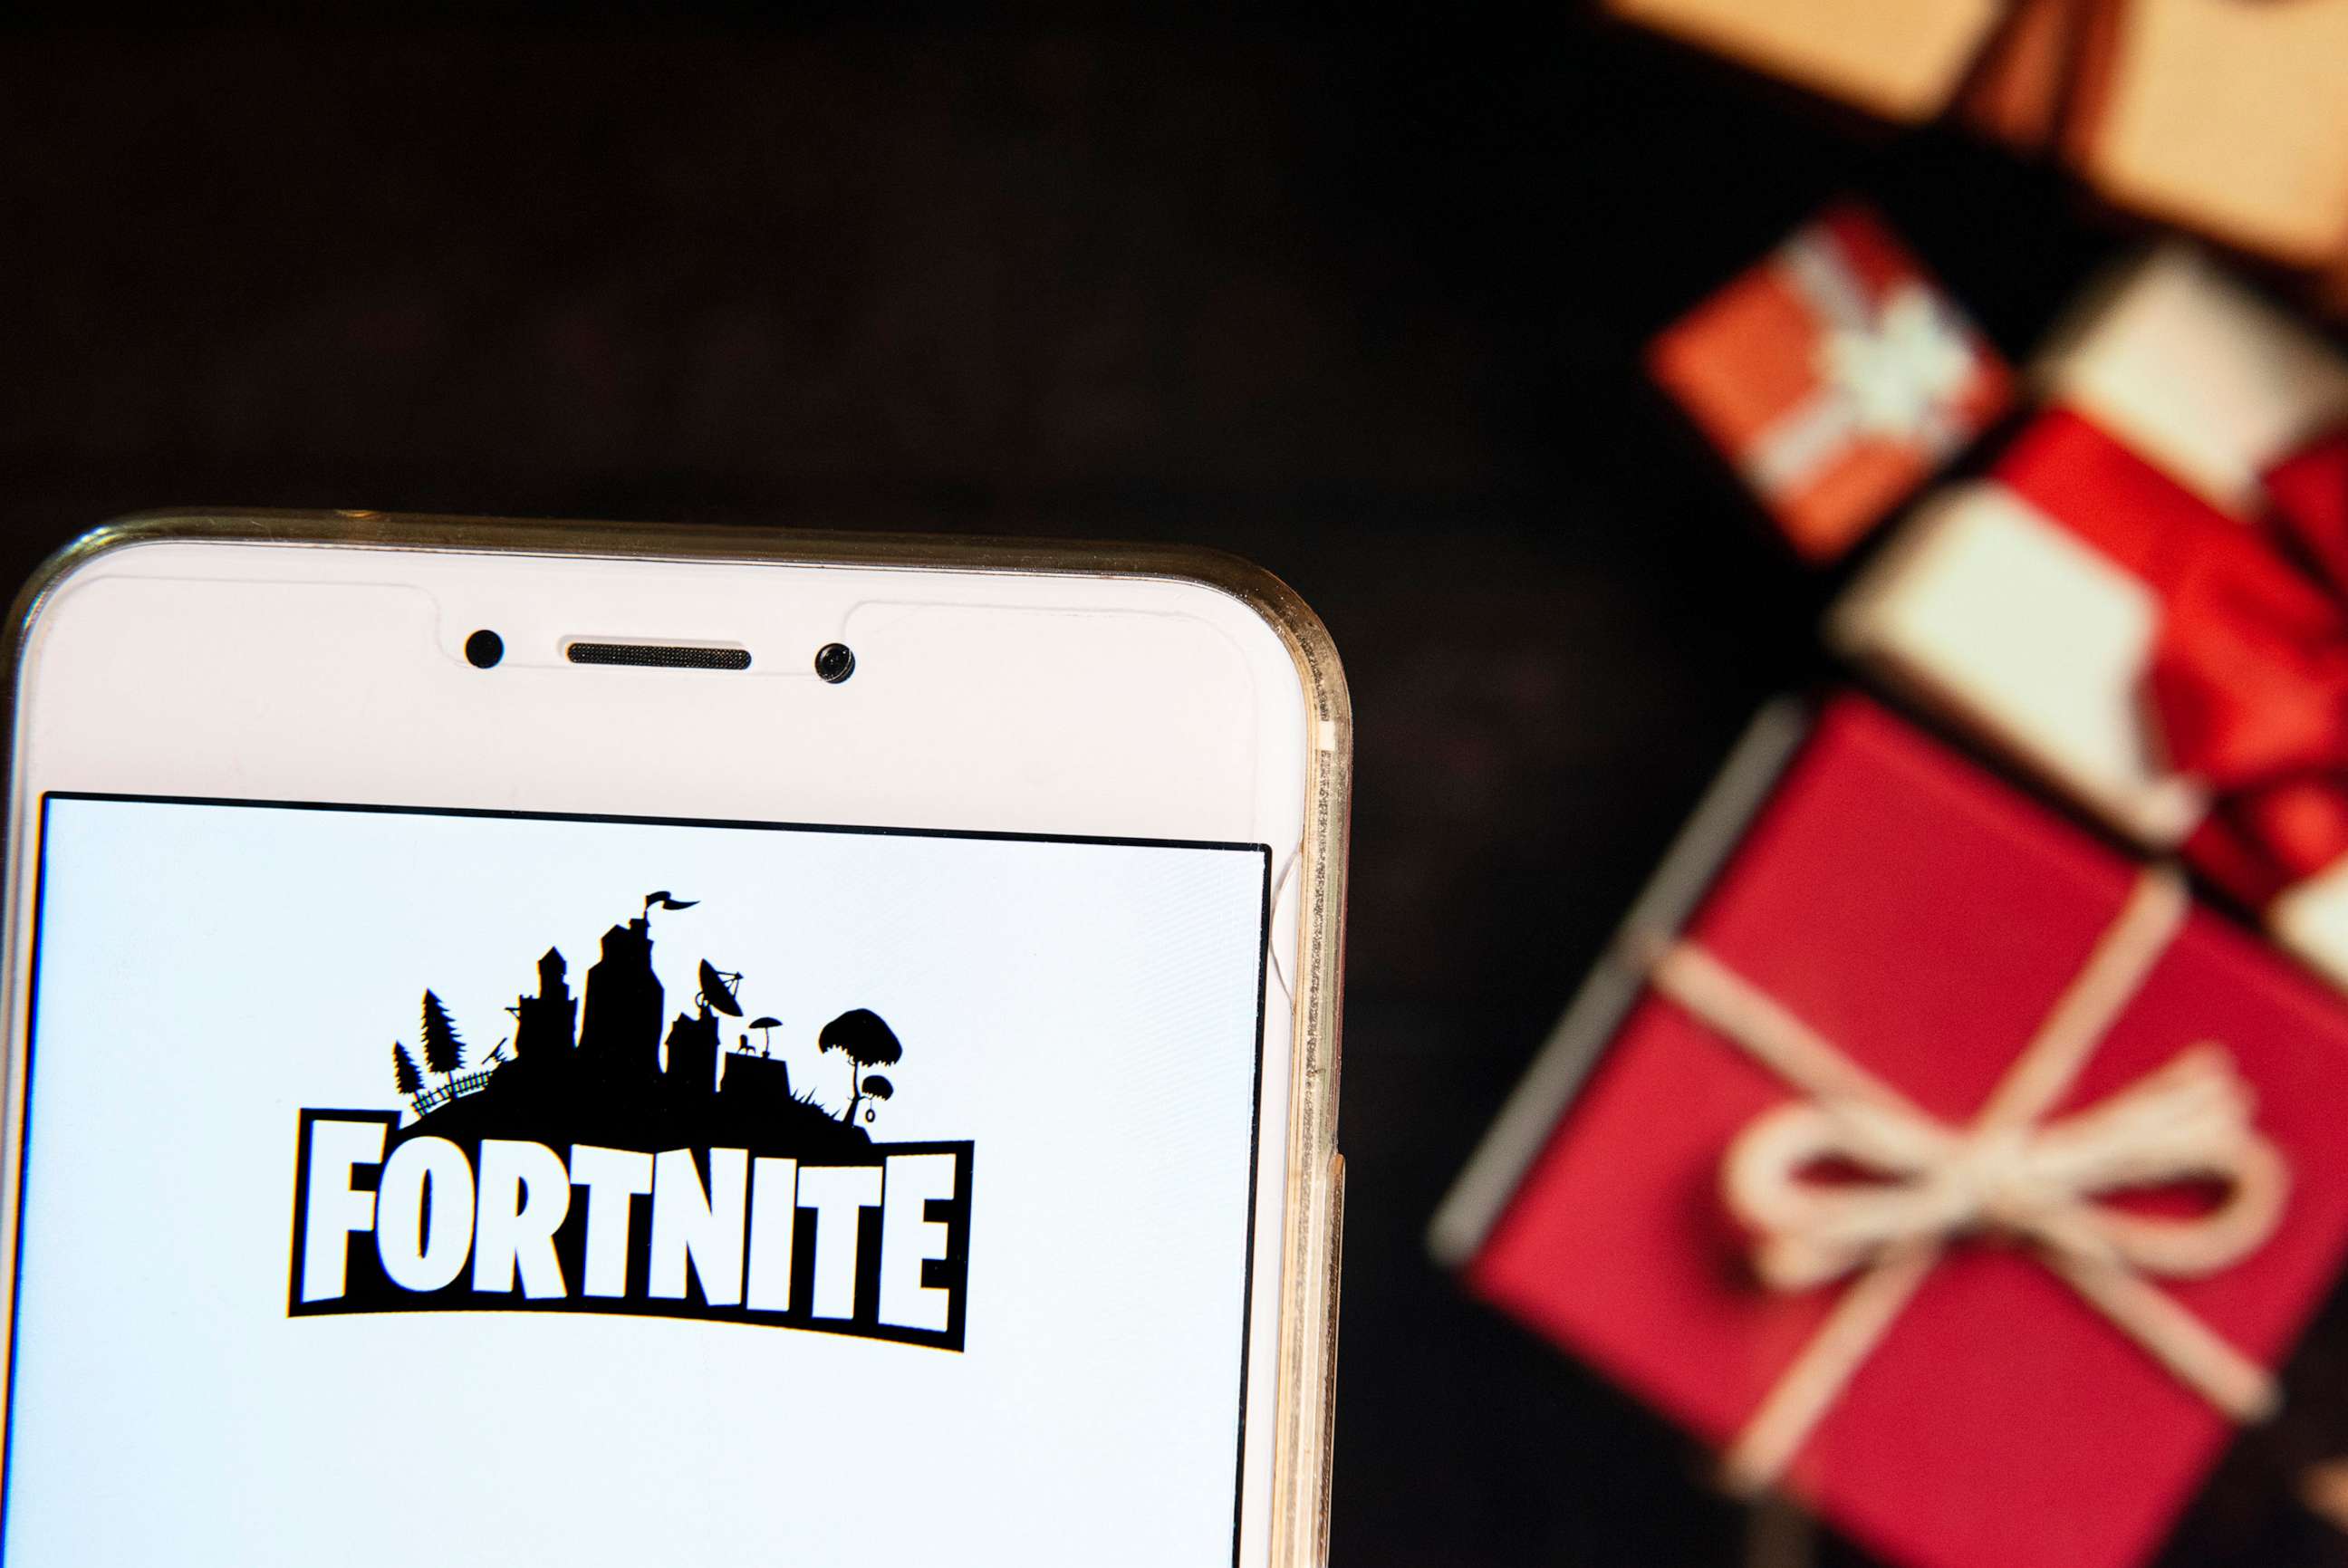 PHOTO: In this photo illustration, the Online video game by Epic Games company Fortnite logo is seen displayed in Hong Kong on Nov. 21, 2018.